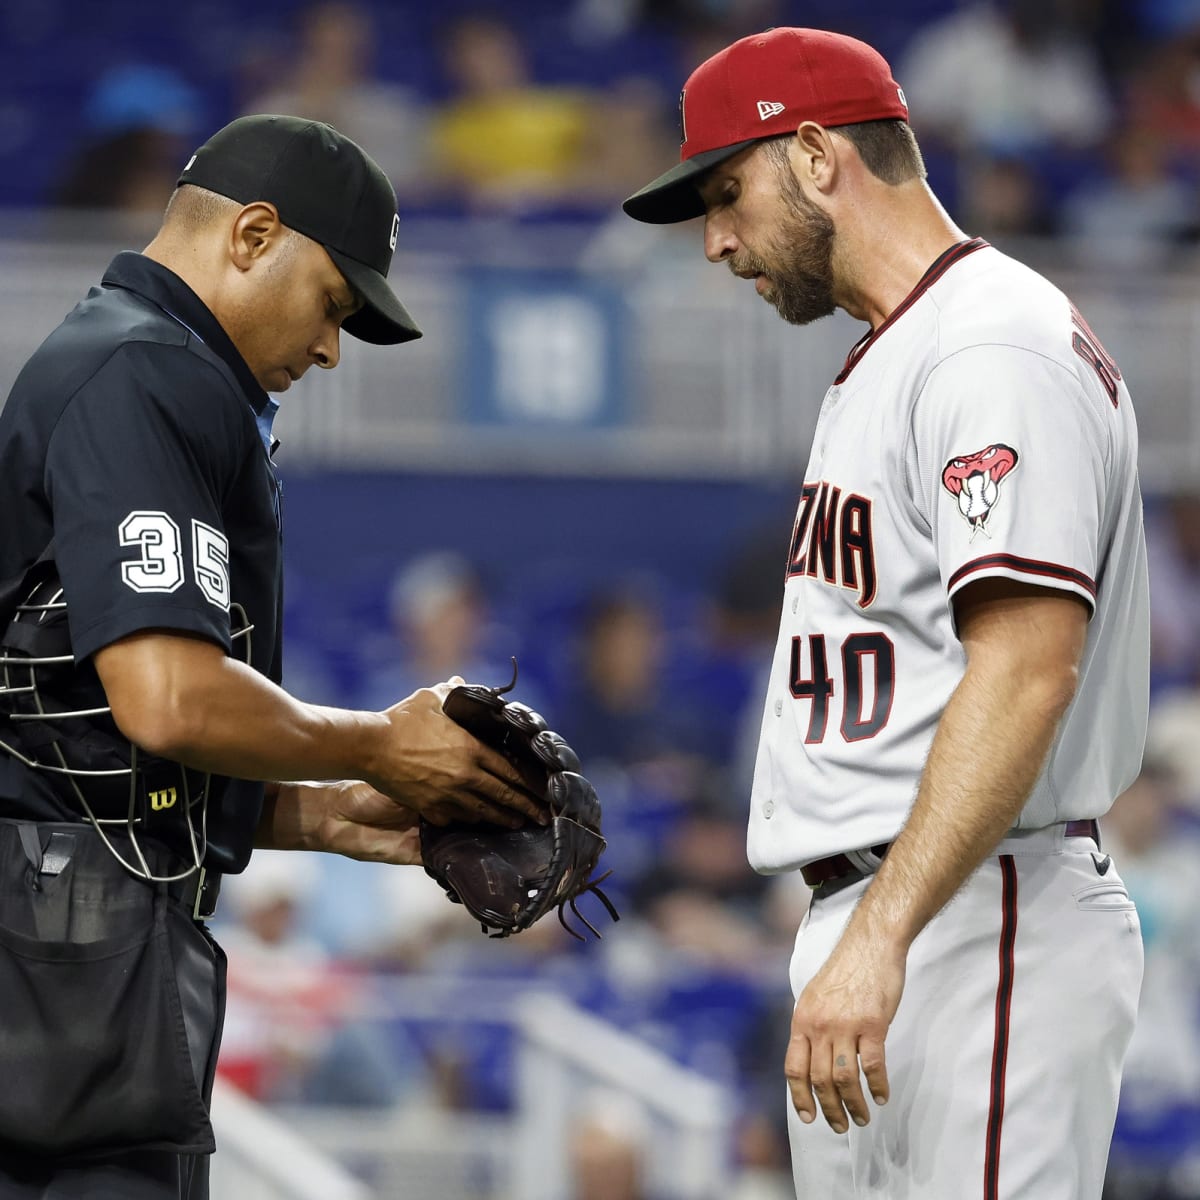 Cutter becoming go-to pitch for D-Backs' Madison Bumgarner